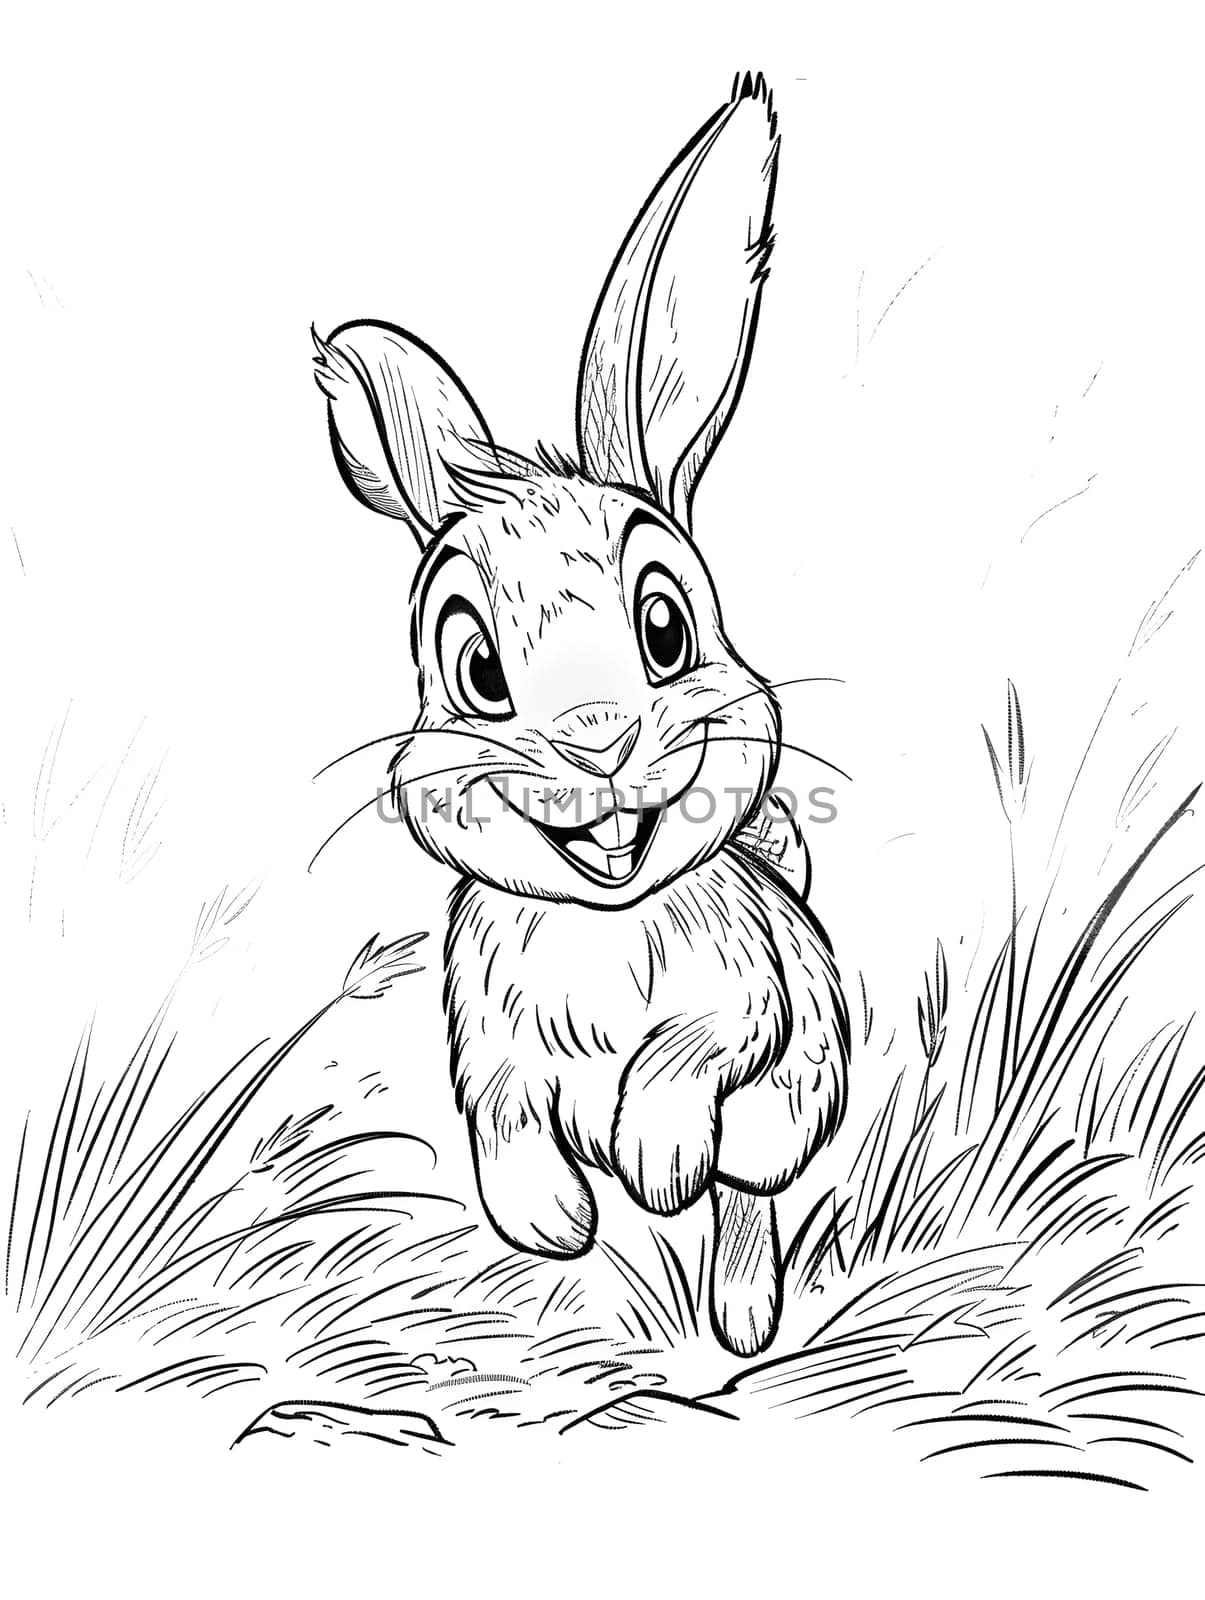 A cartoon rabbit with long ears and a jaw dropped in a gesture of surprise, running through the grass. An artistic portrayal of this organism in black and white